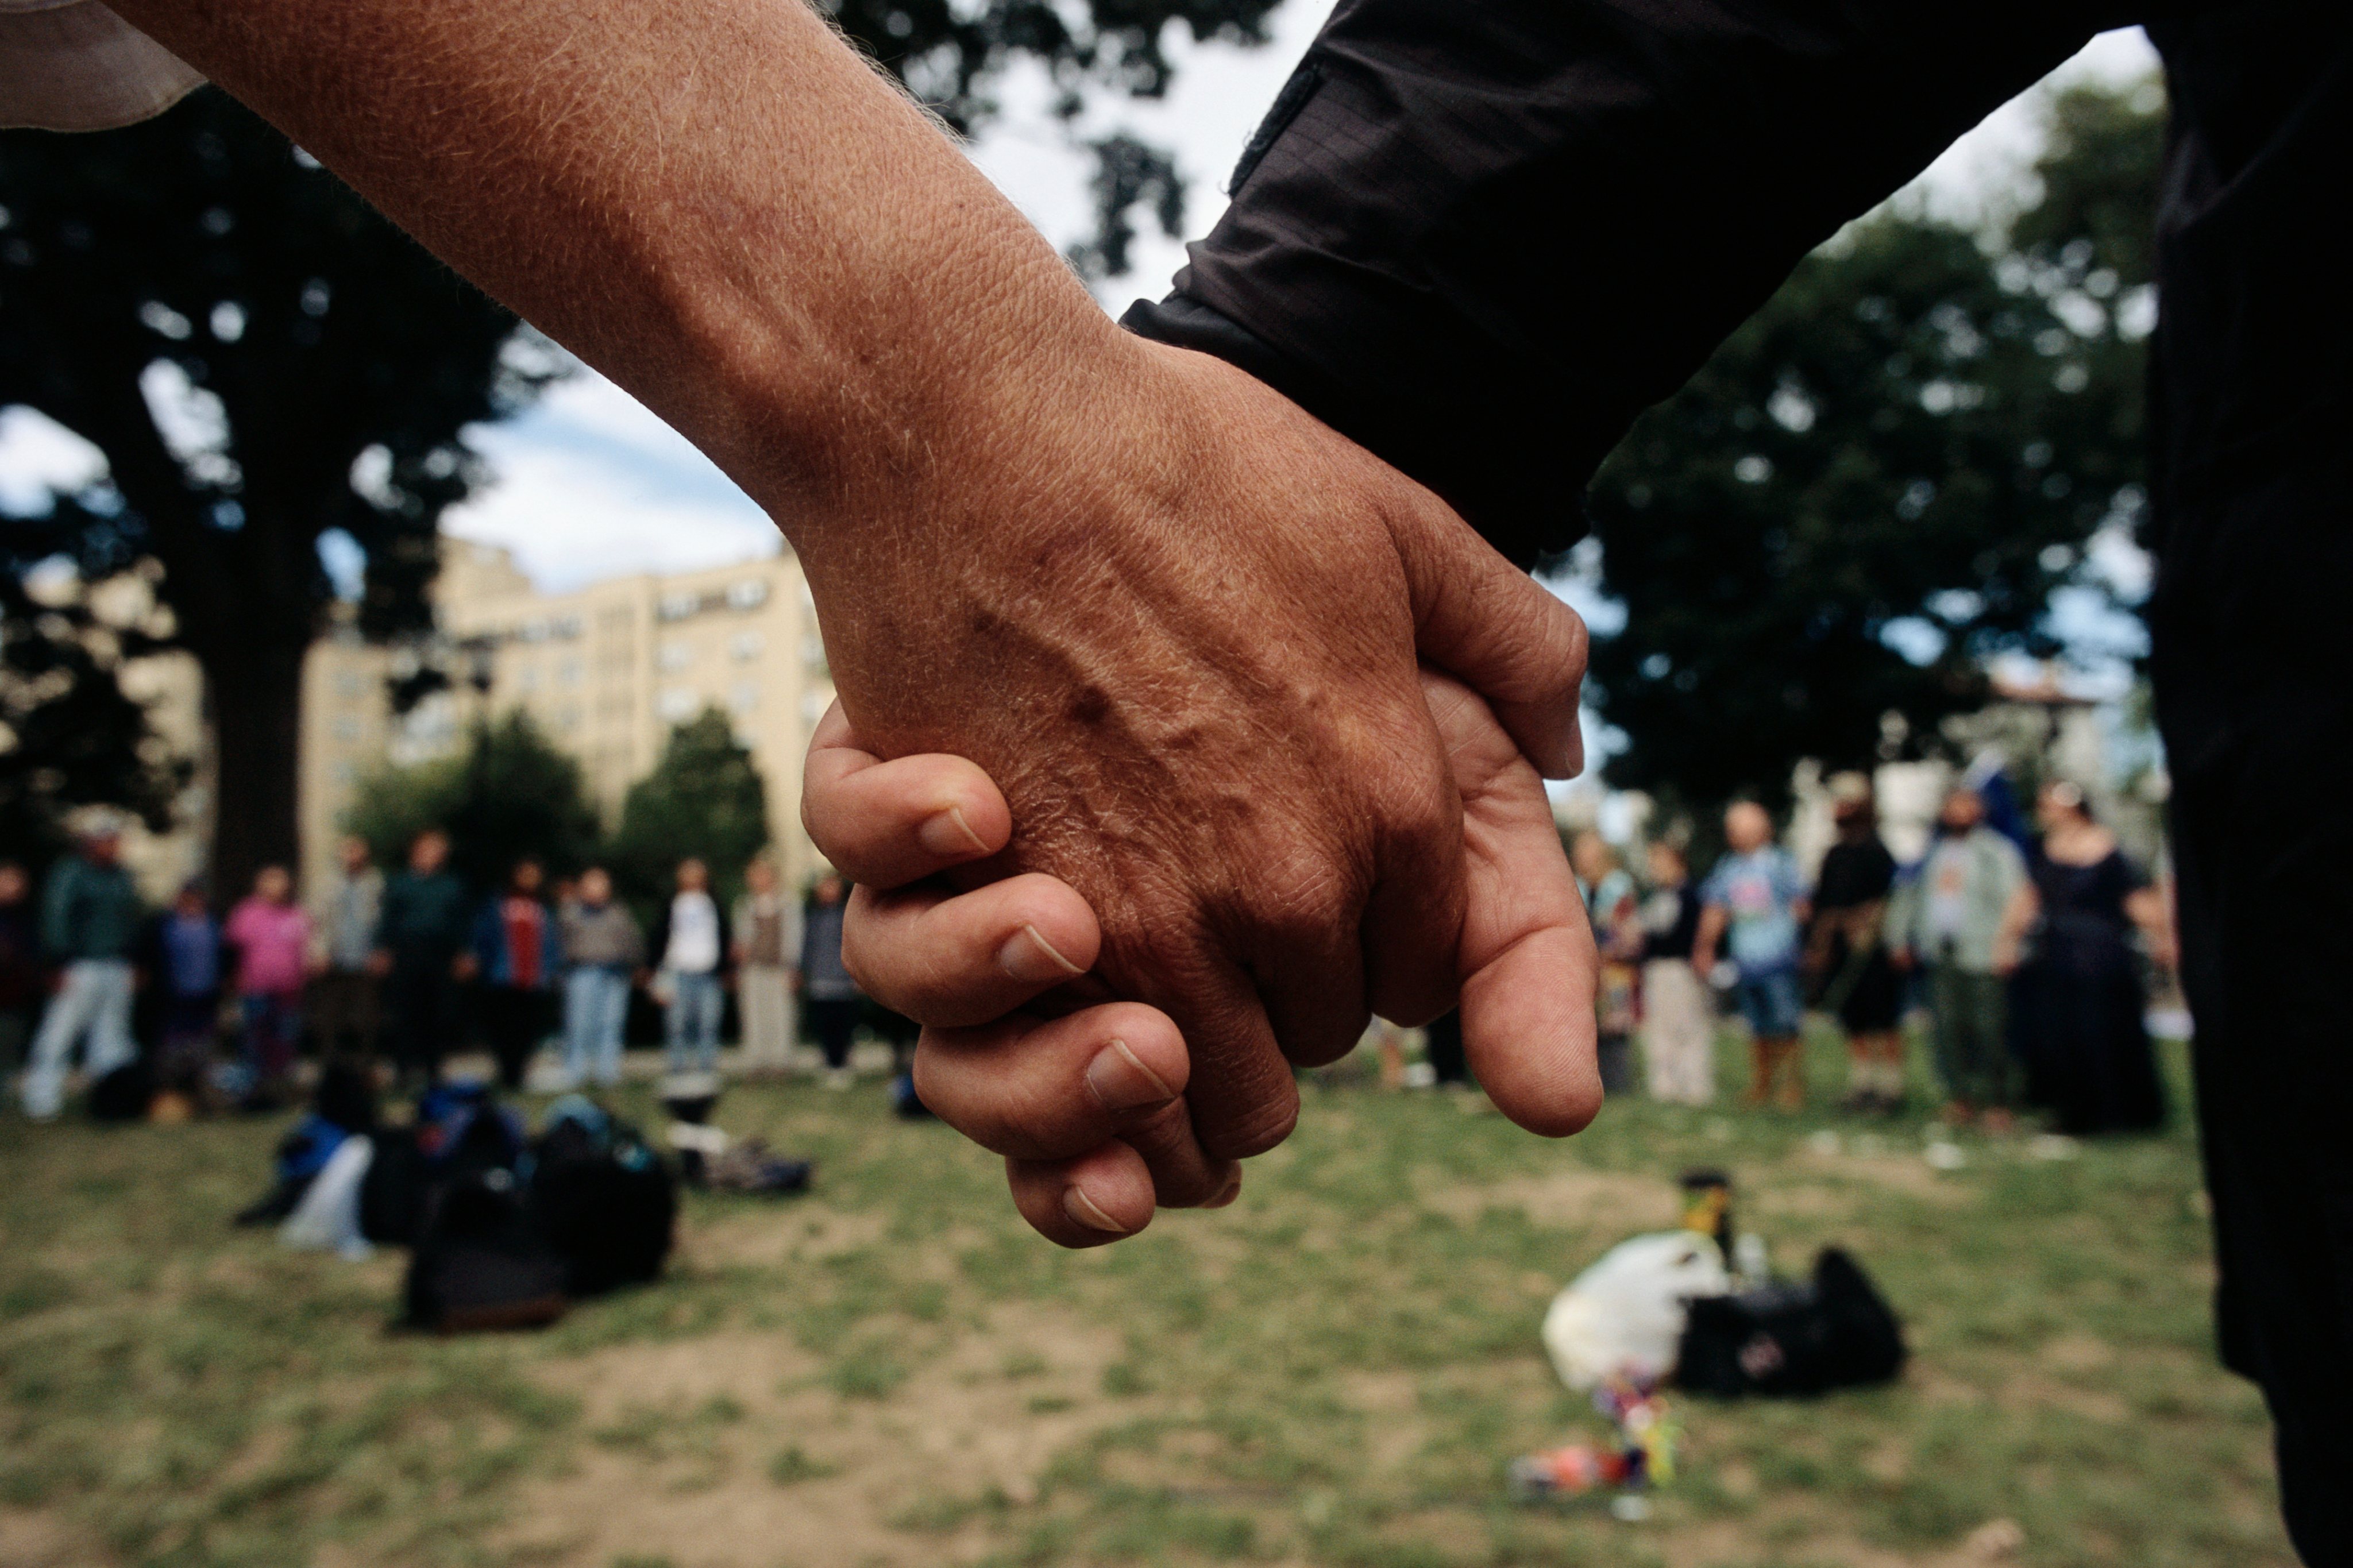 Demonstrators Holds Hands at Anti-War Protest